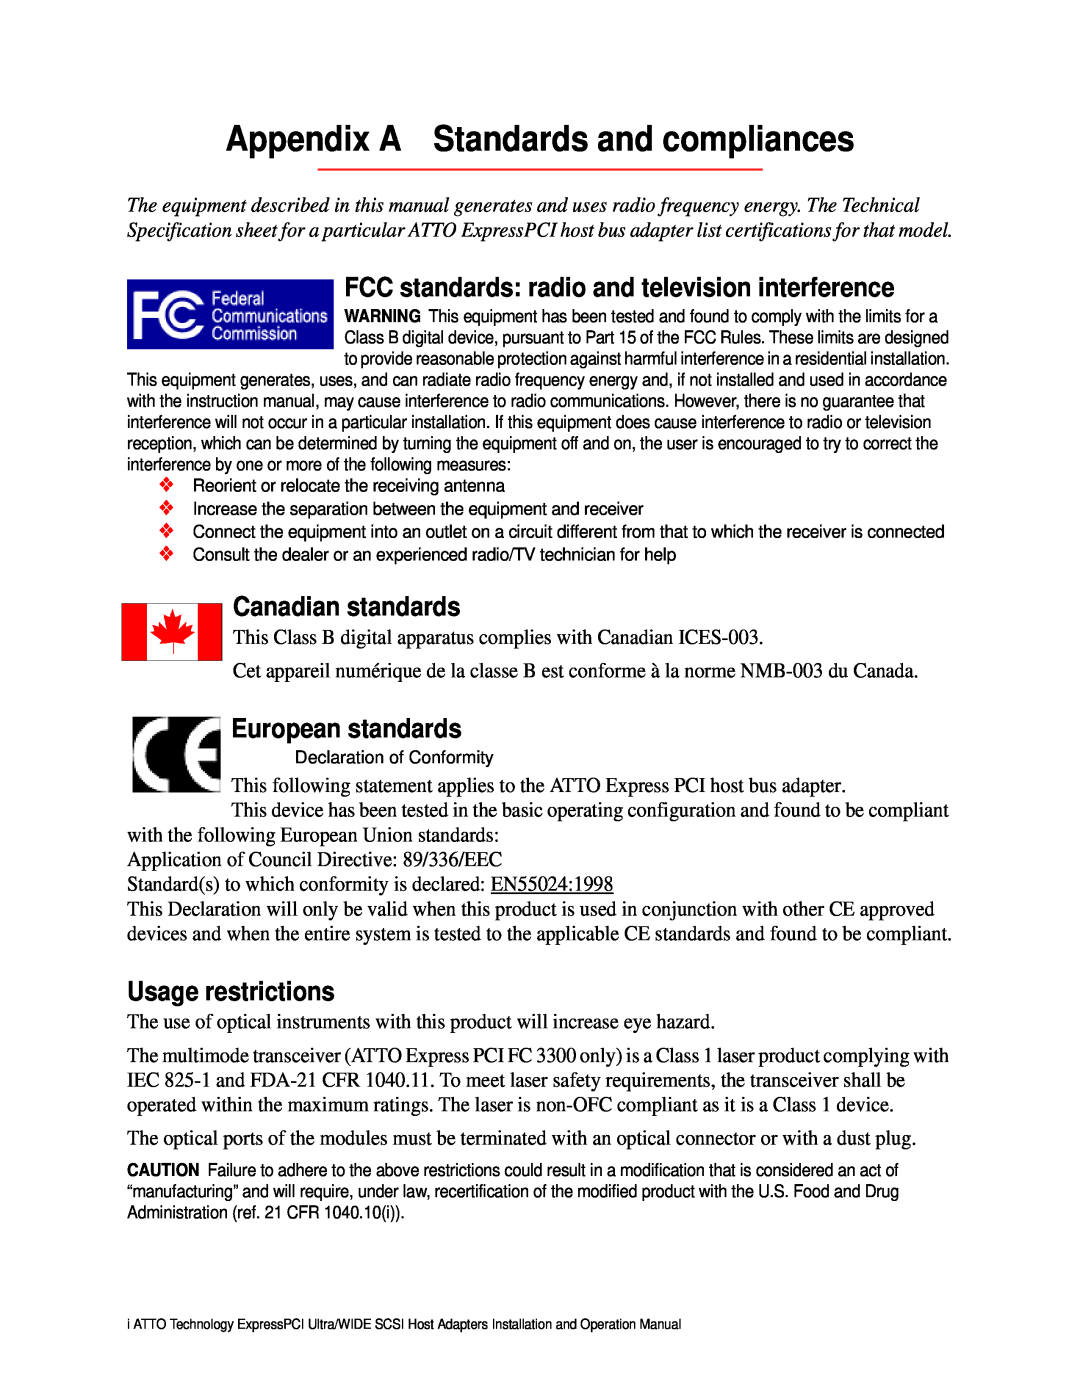 ATTO Technology Appendix A Standards and compliances, FCC standards radio and television interference, Canadian standards 